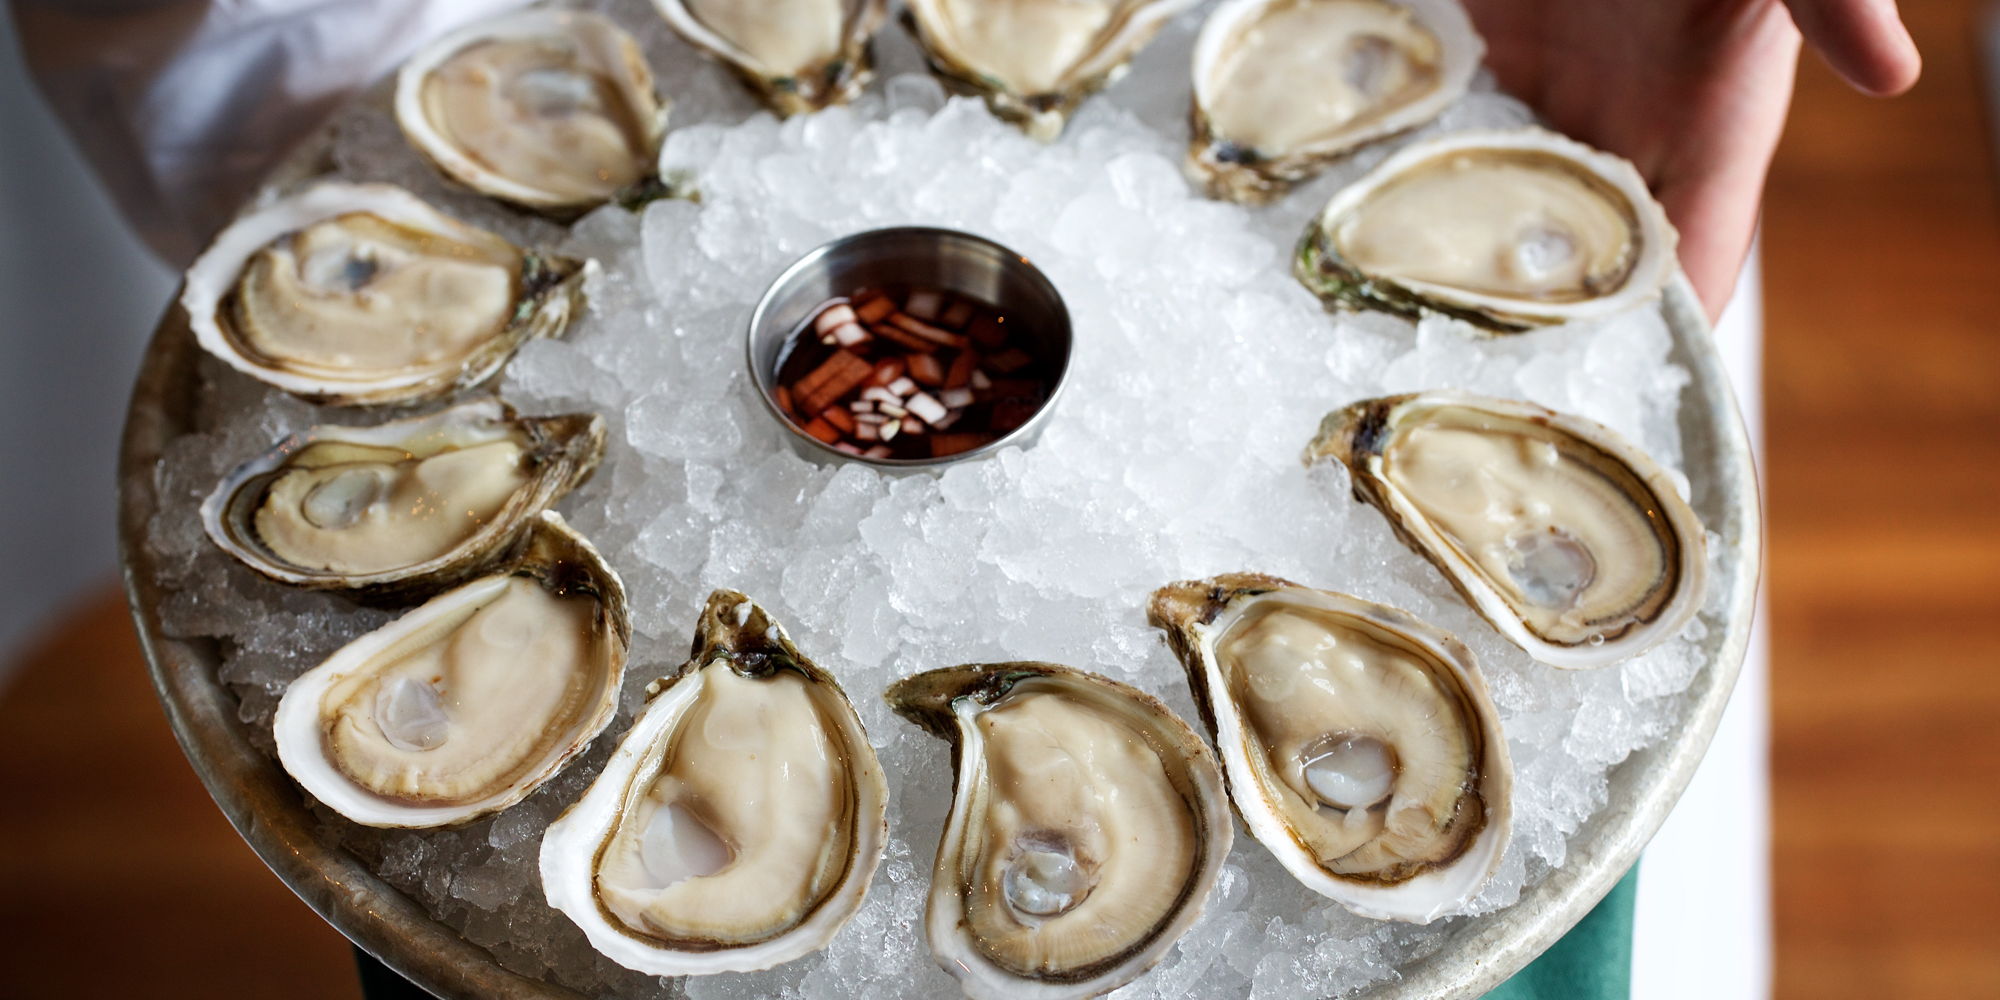 Oyster Happy Hour at Clyde's Tower Oaks Lodge promotional image